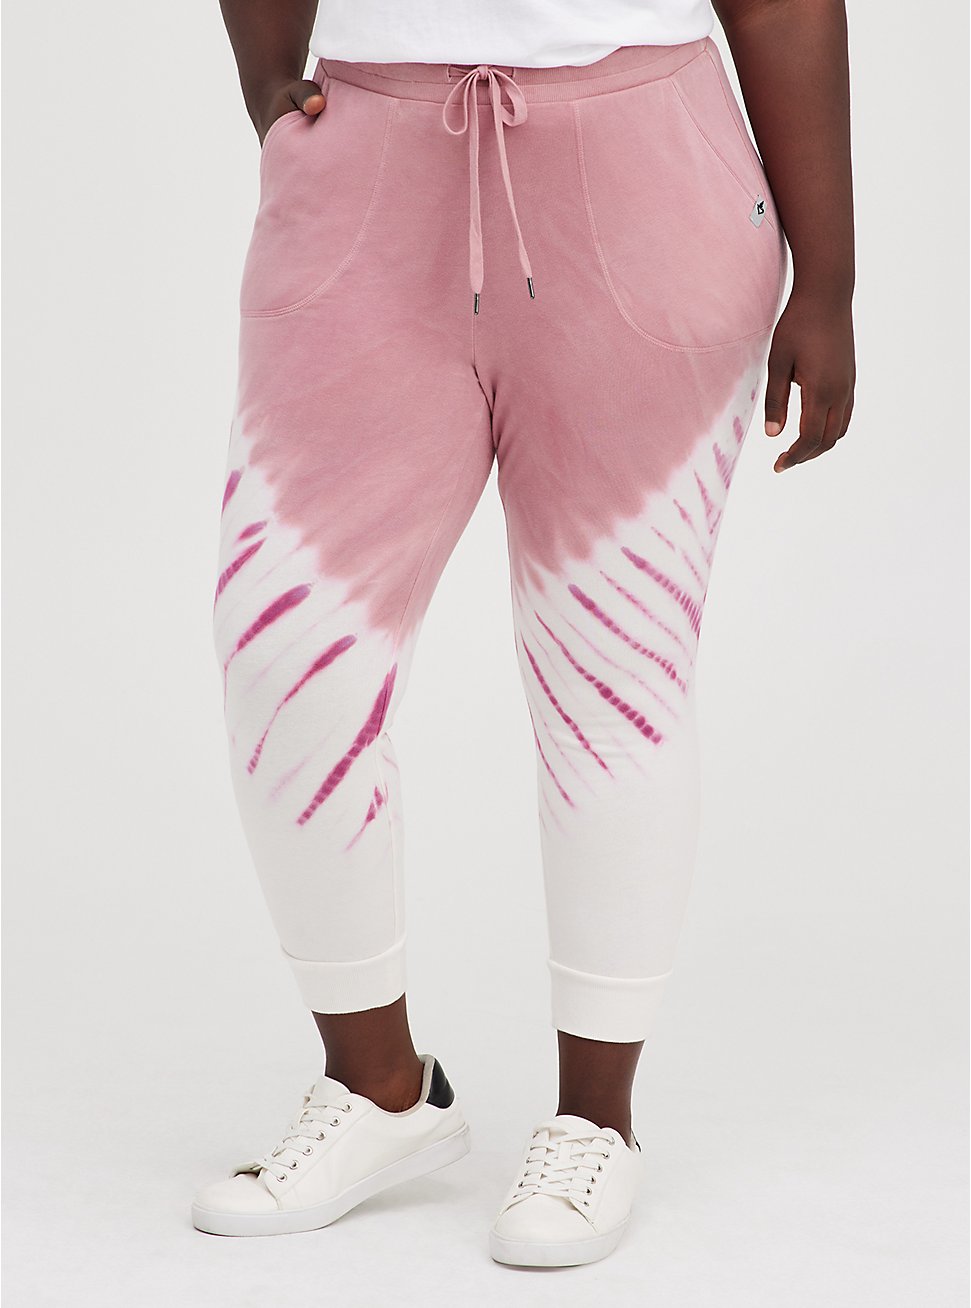 Plus Size Breast Cancer Awareness Classic Fit Active Jogger - Everyday Fleece Tie-Dye Pink , TIE DYE, hi-res